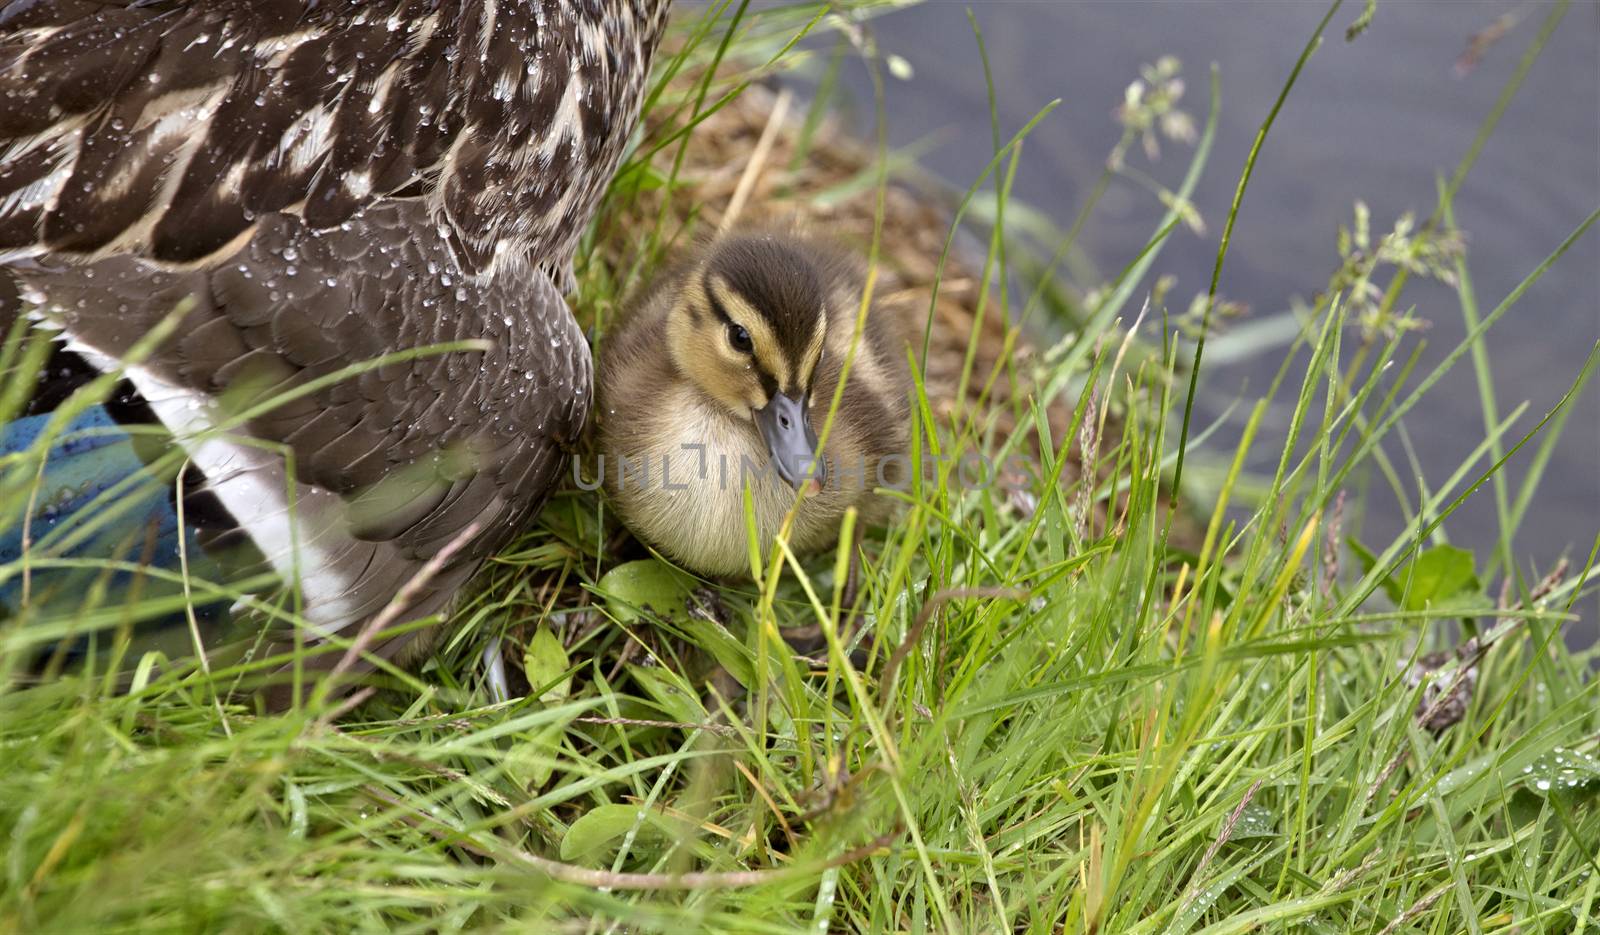 Mother Duck and Babies by pictureguy